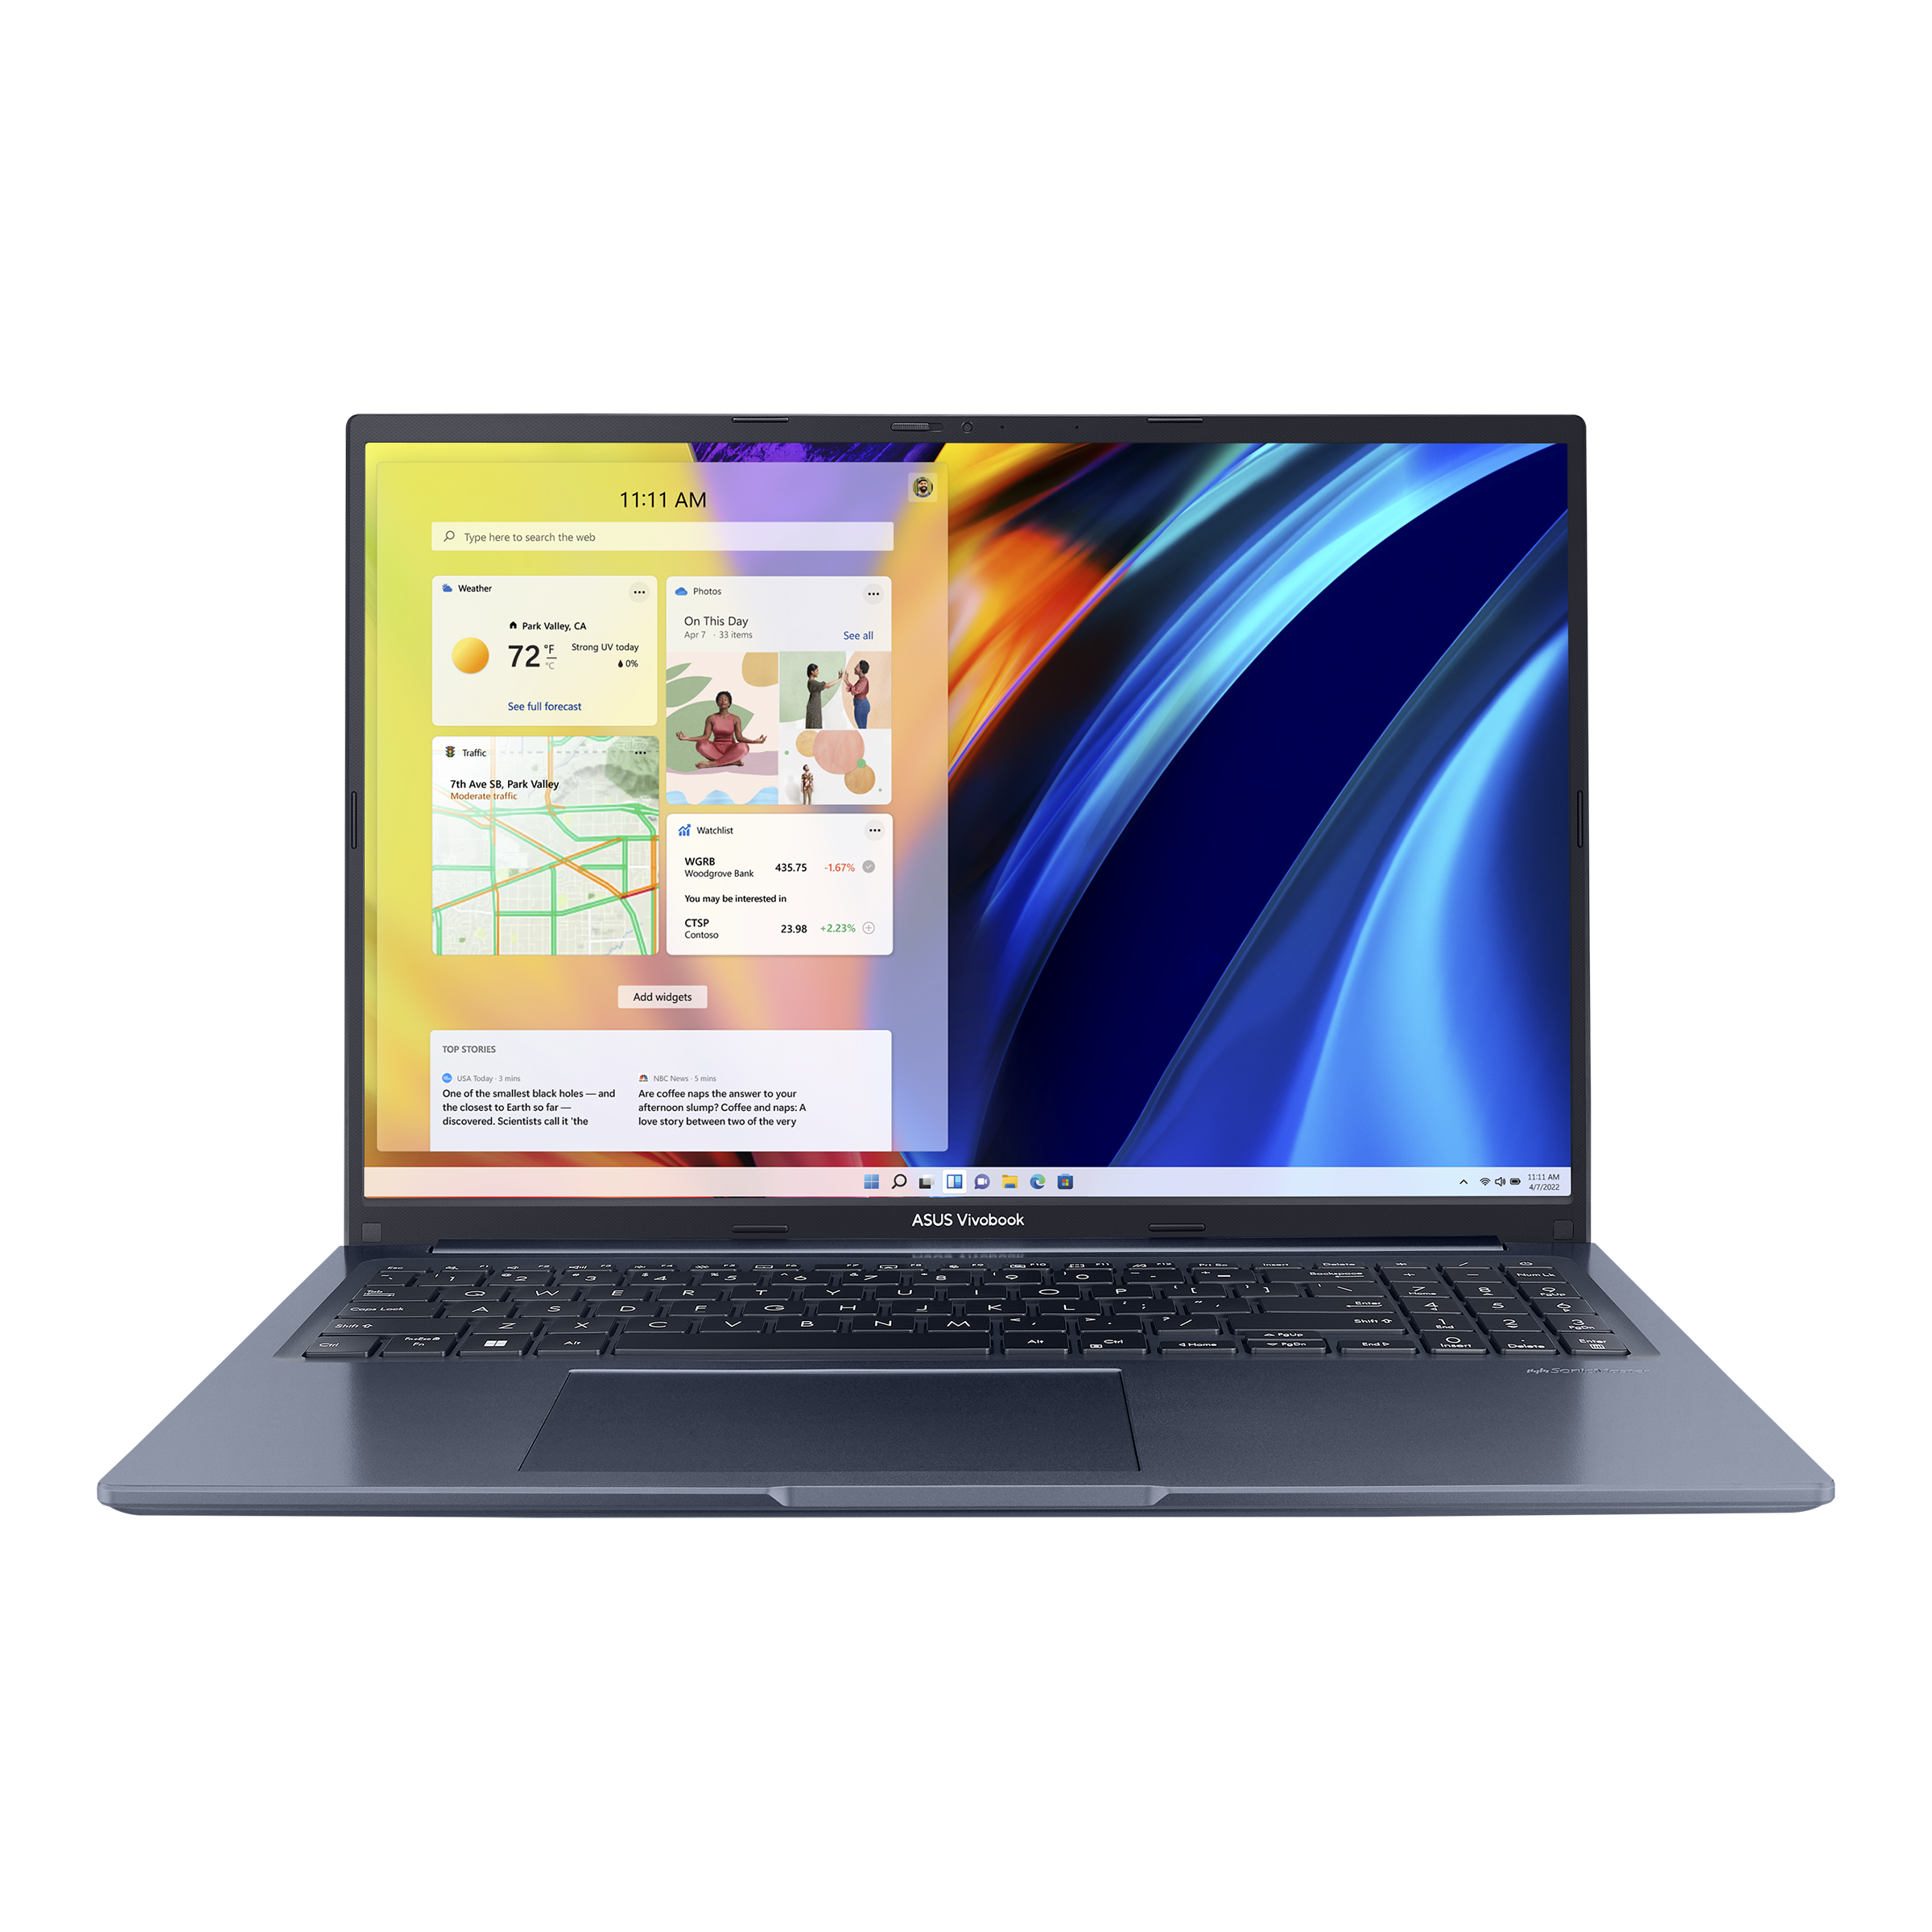 Vivobook　Home　India　Laptop　16X　M1603　ASUS　Buy　ASUS　for　Use